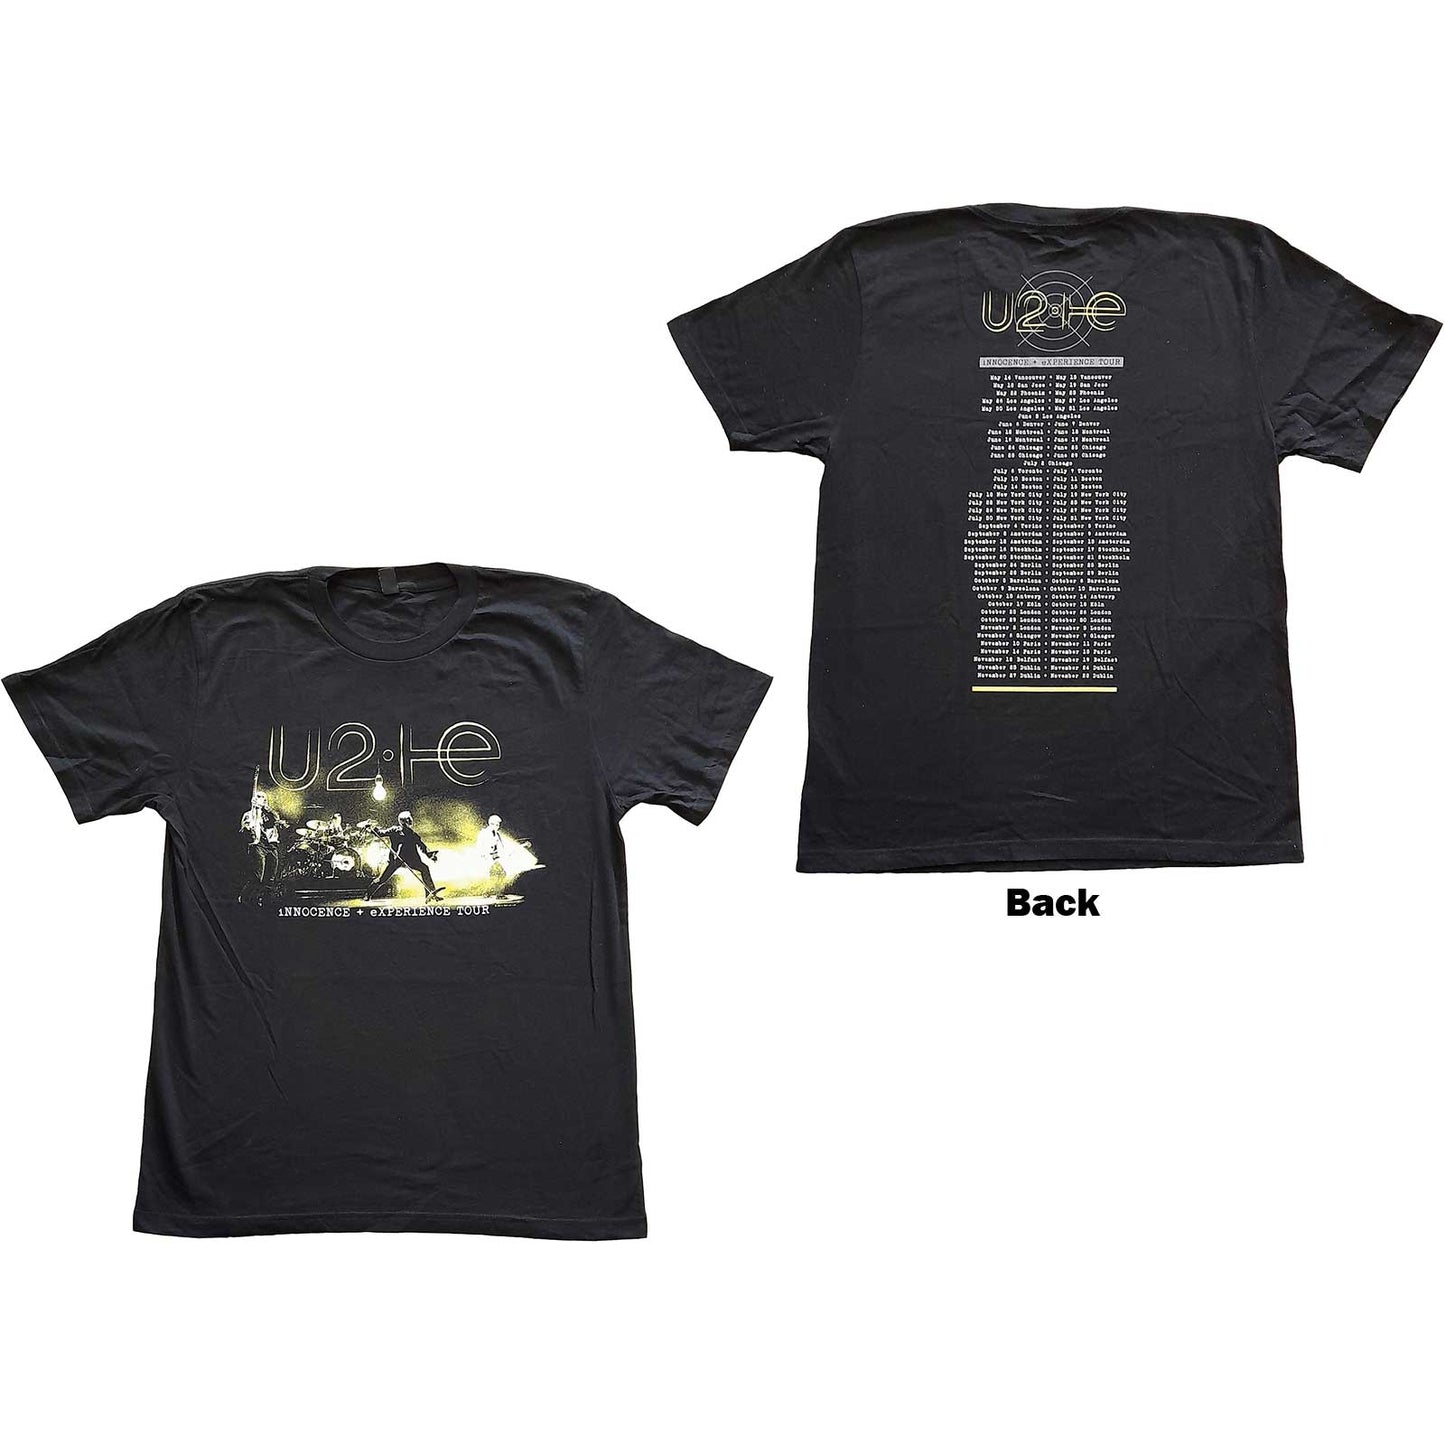 U2 T-Shirt - Innocence + Experience Tour 2018 With Back Print (Unisex) Front and Back